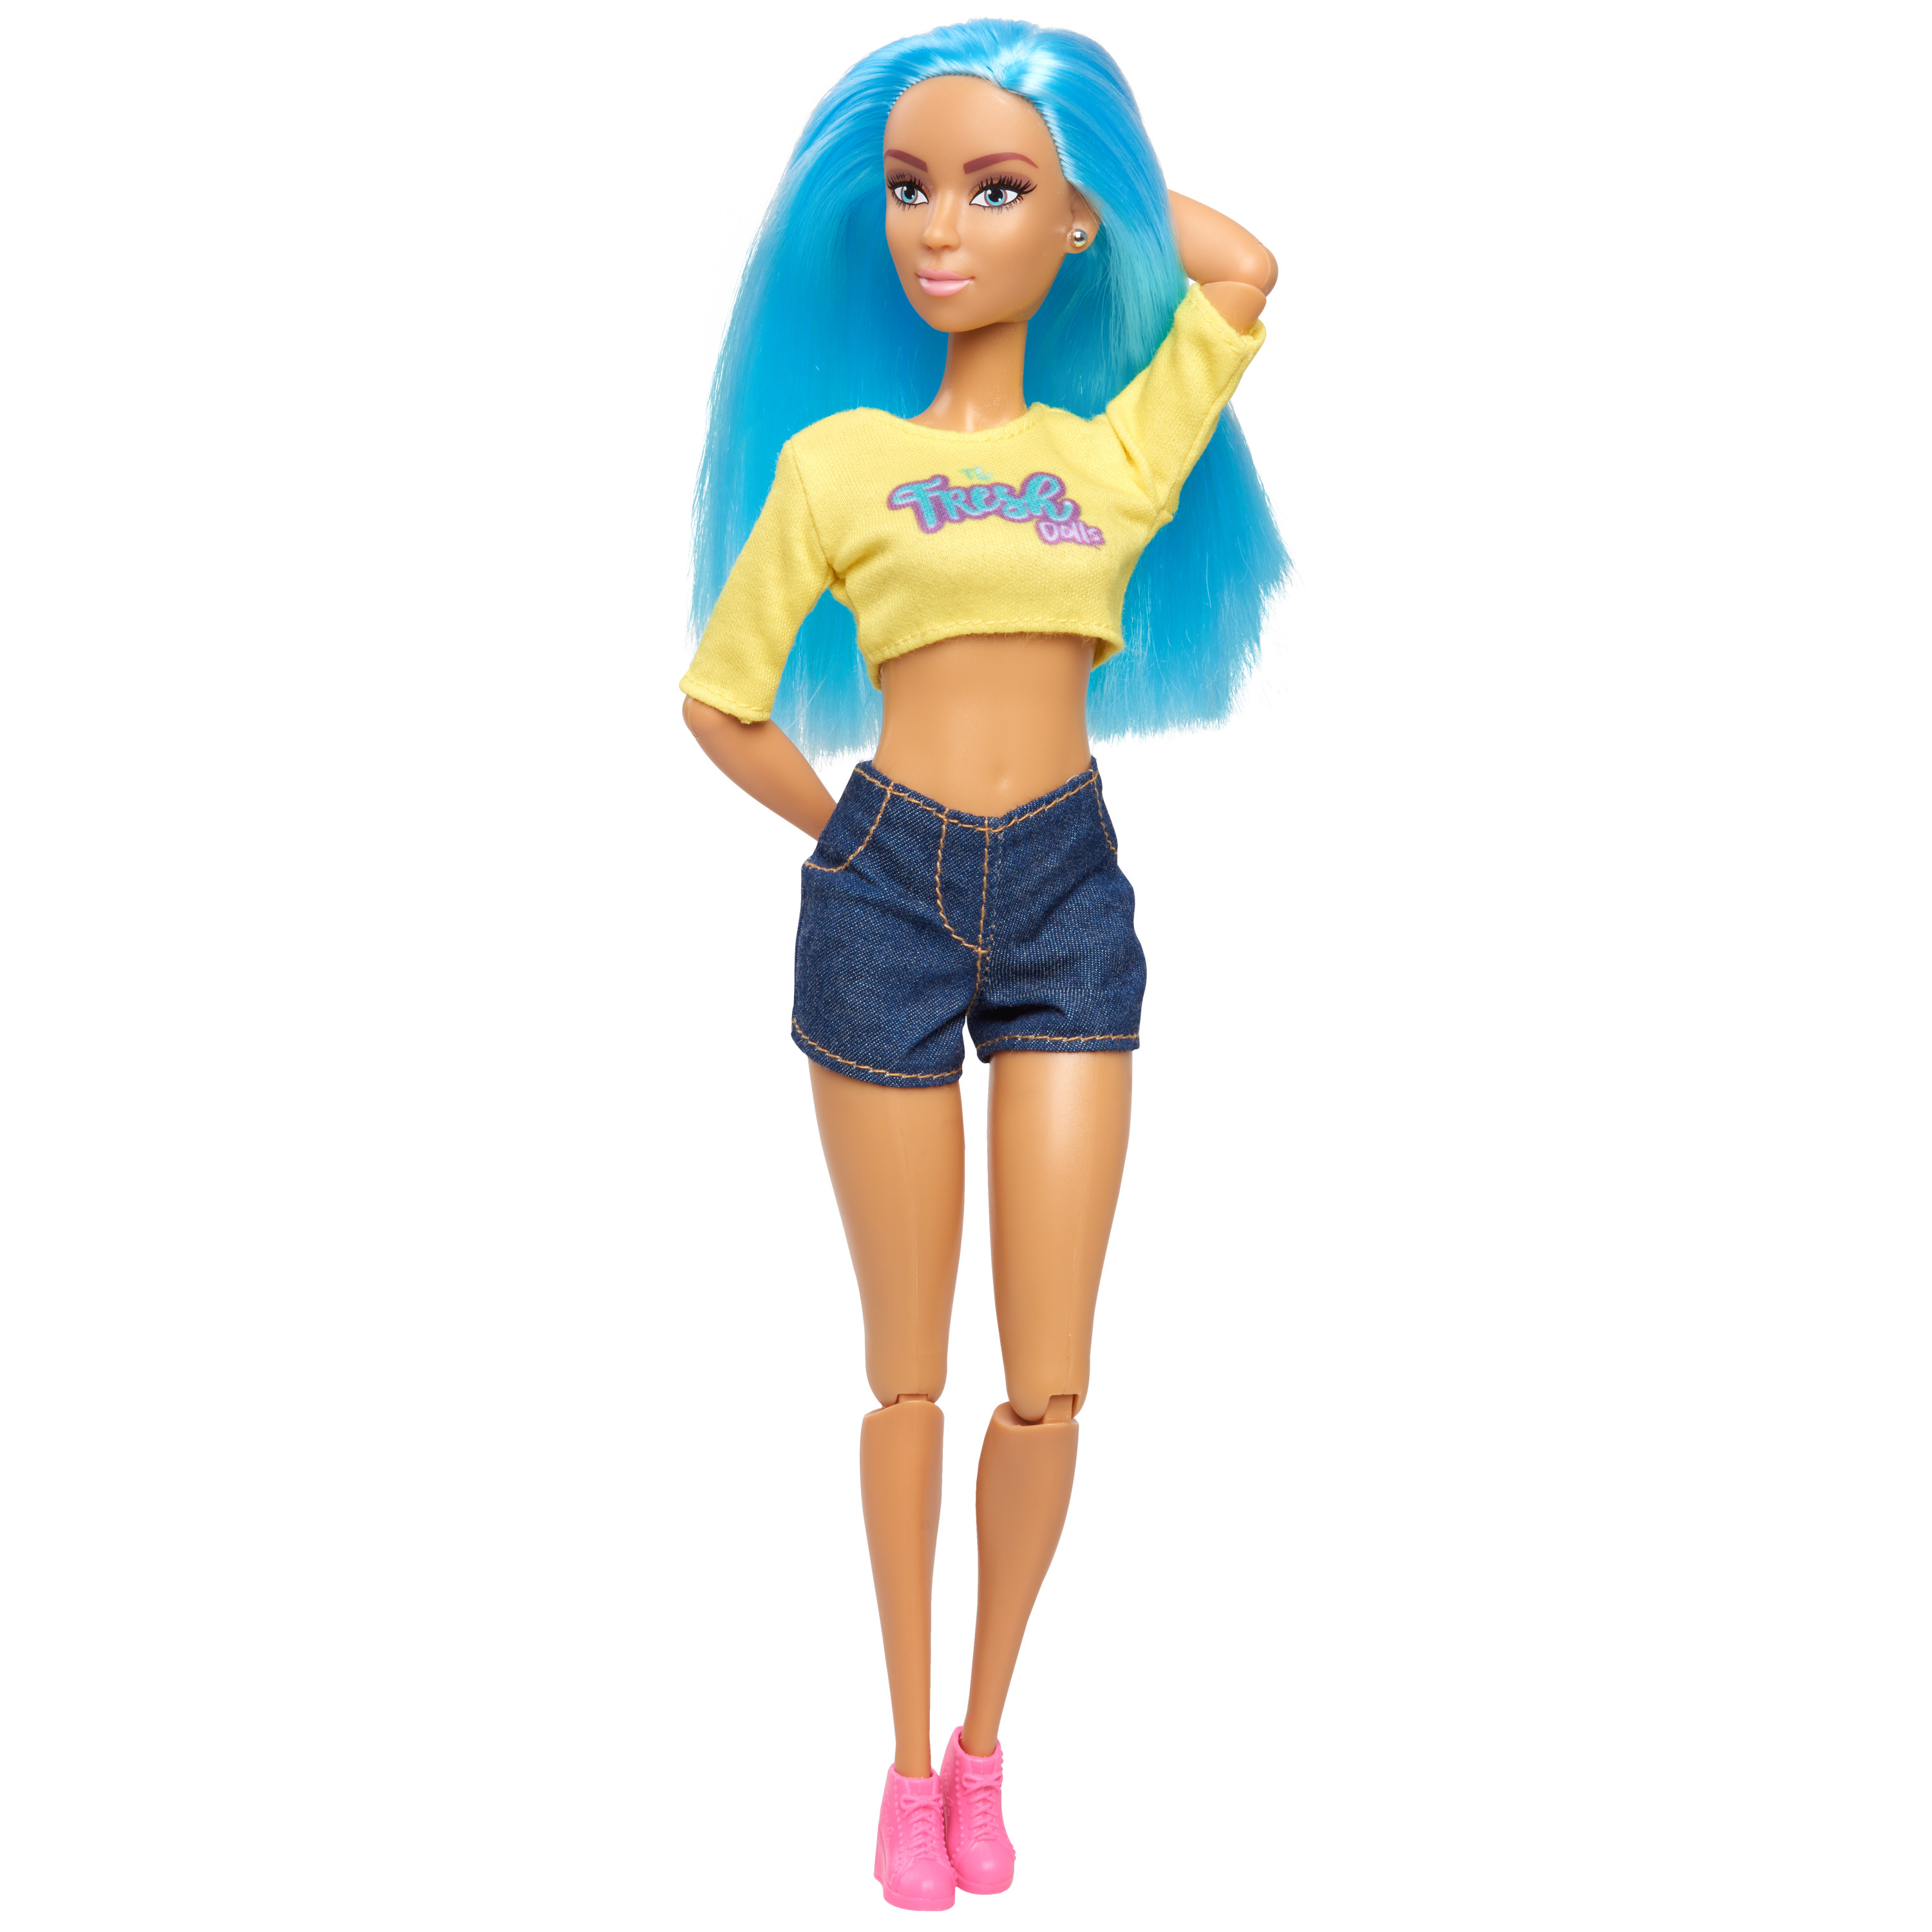 Fresh Dolls Skylar Fashion Doll, 11.5-inches tall, yellow shirt and jean shorts, blue hair,  Kids Toys for Ages 3 Up, Gifts and Presents - image 2 of 5